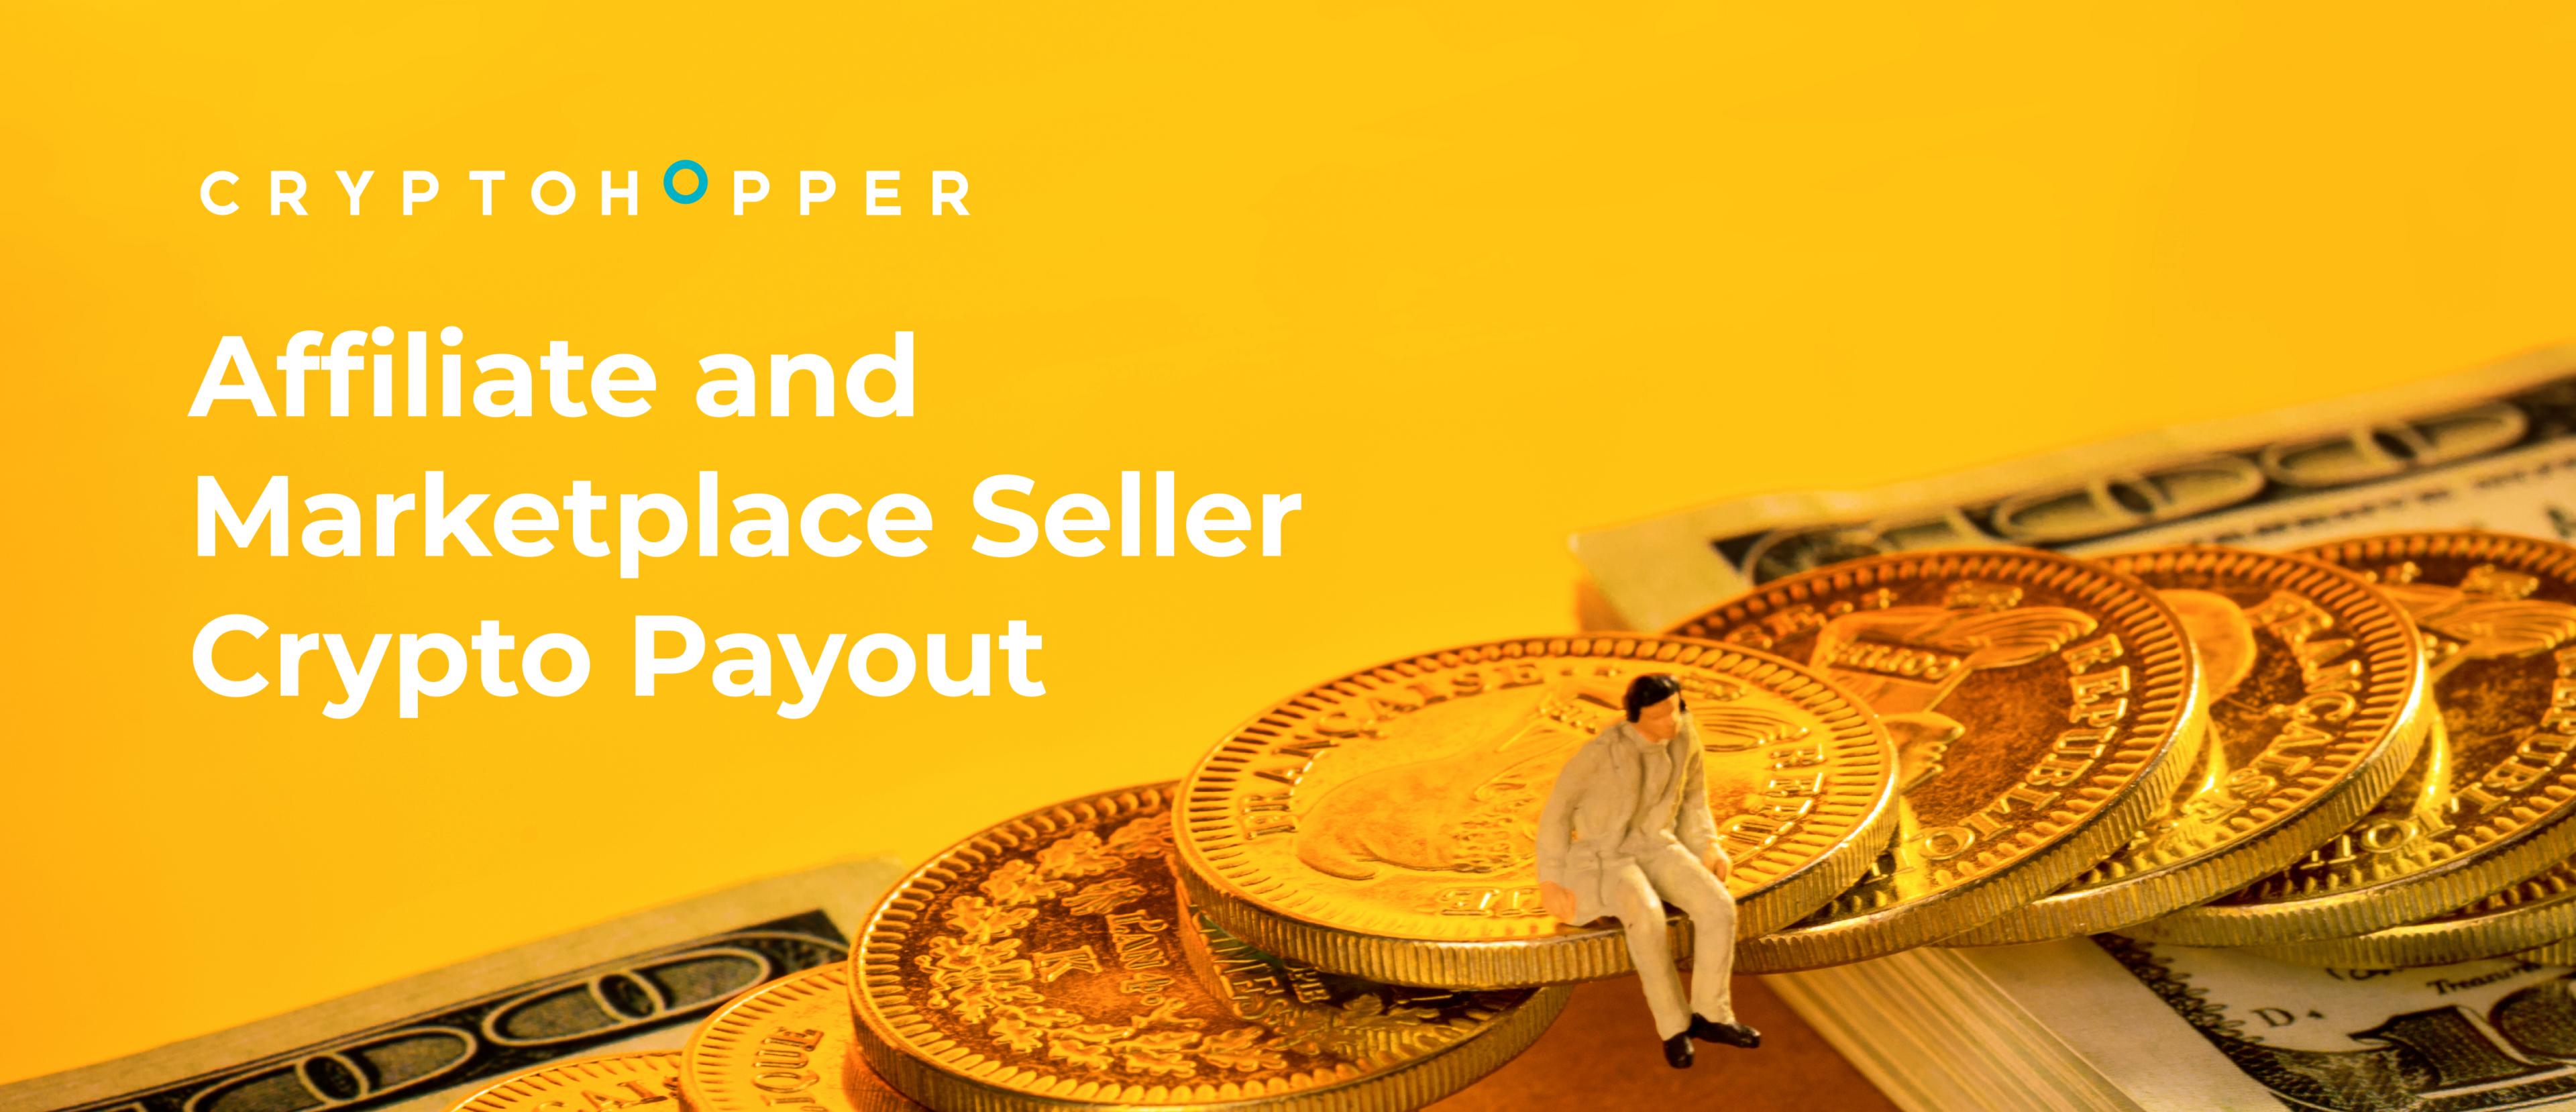 Affiliate and Marketplace Seller Crypto Payout Update Cryptohopper 